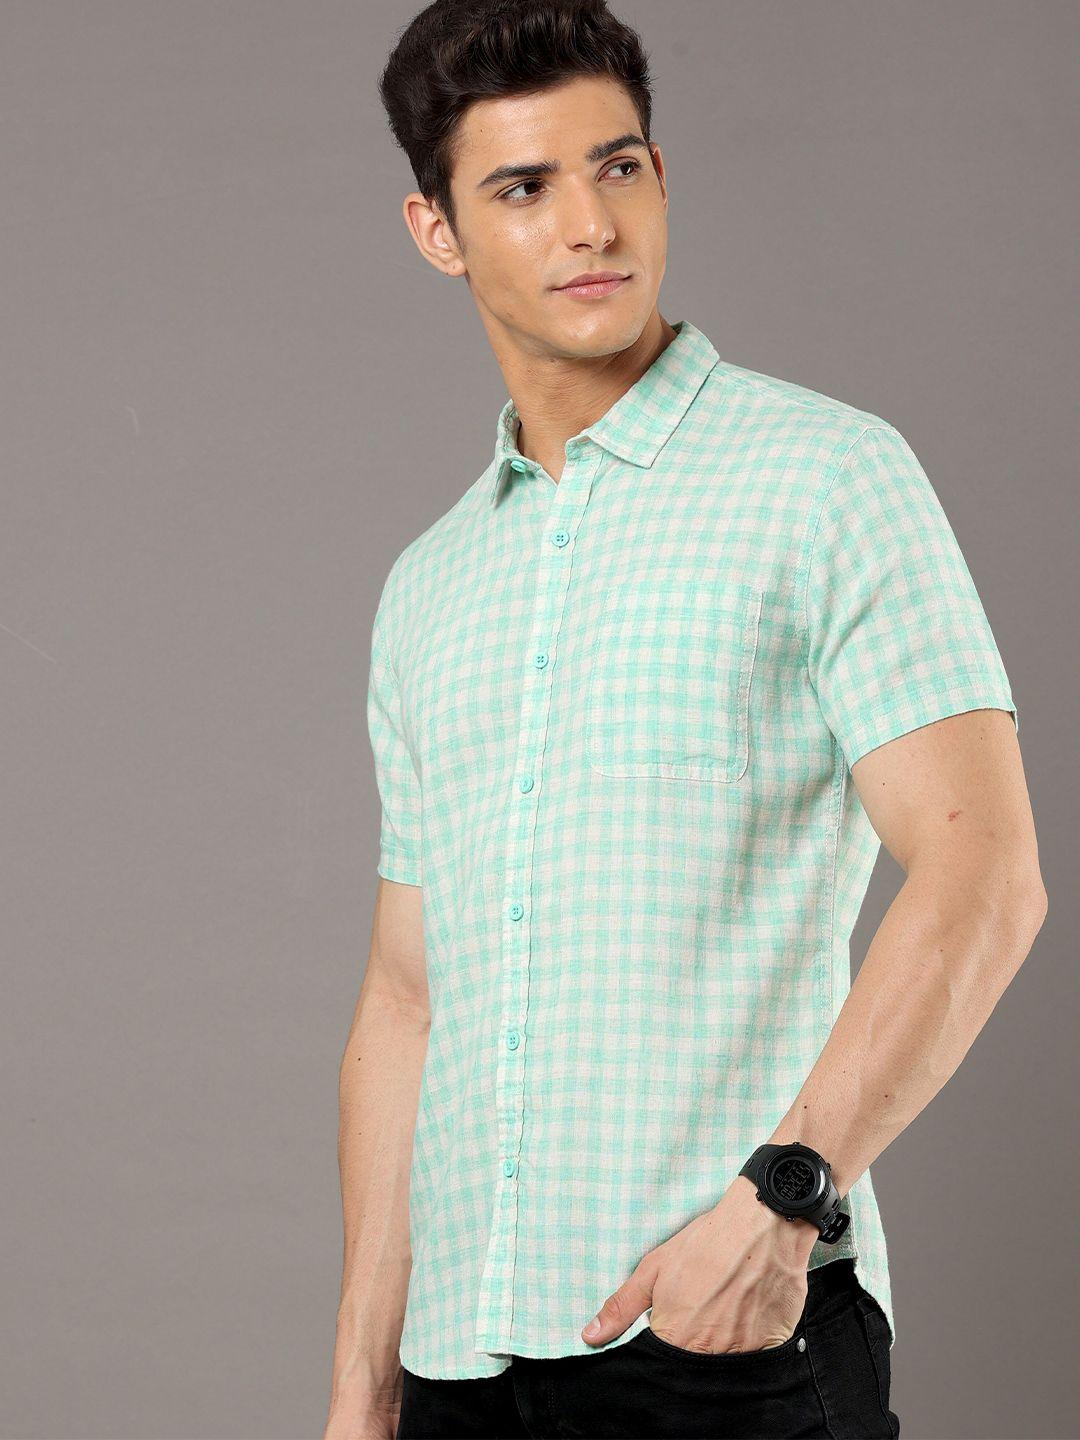 here&now white & sea green colour gingham checked slim fit cotton casual shirt